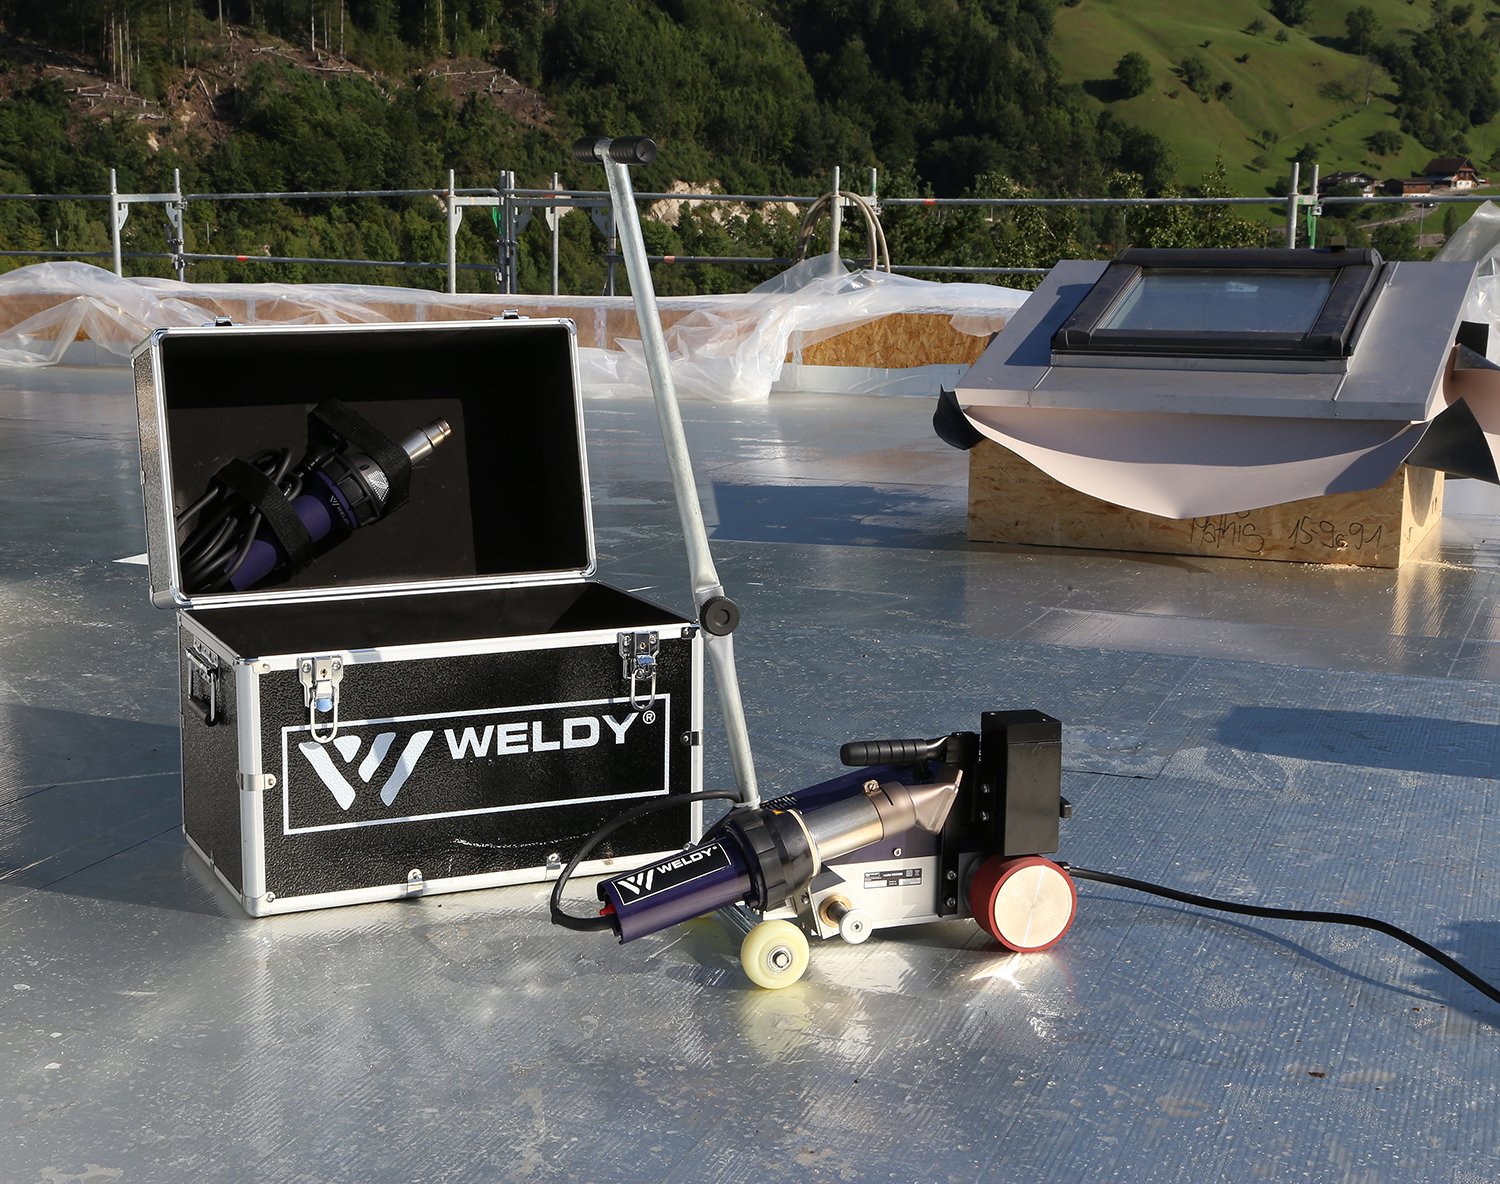 WELDY 230V RW3400 Plastic Roofing Hot Air Welder 40mm Width Nozzle for Roof Welding with Free Overlap Heat Gun Kit